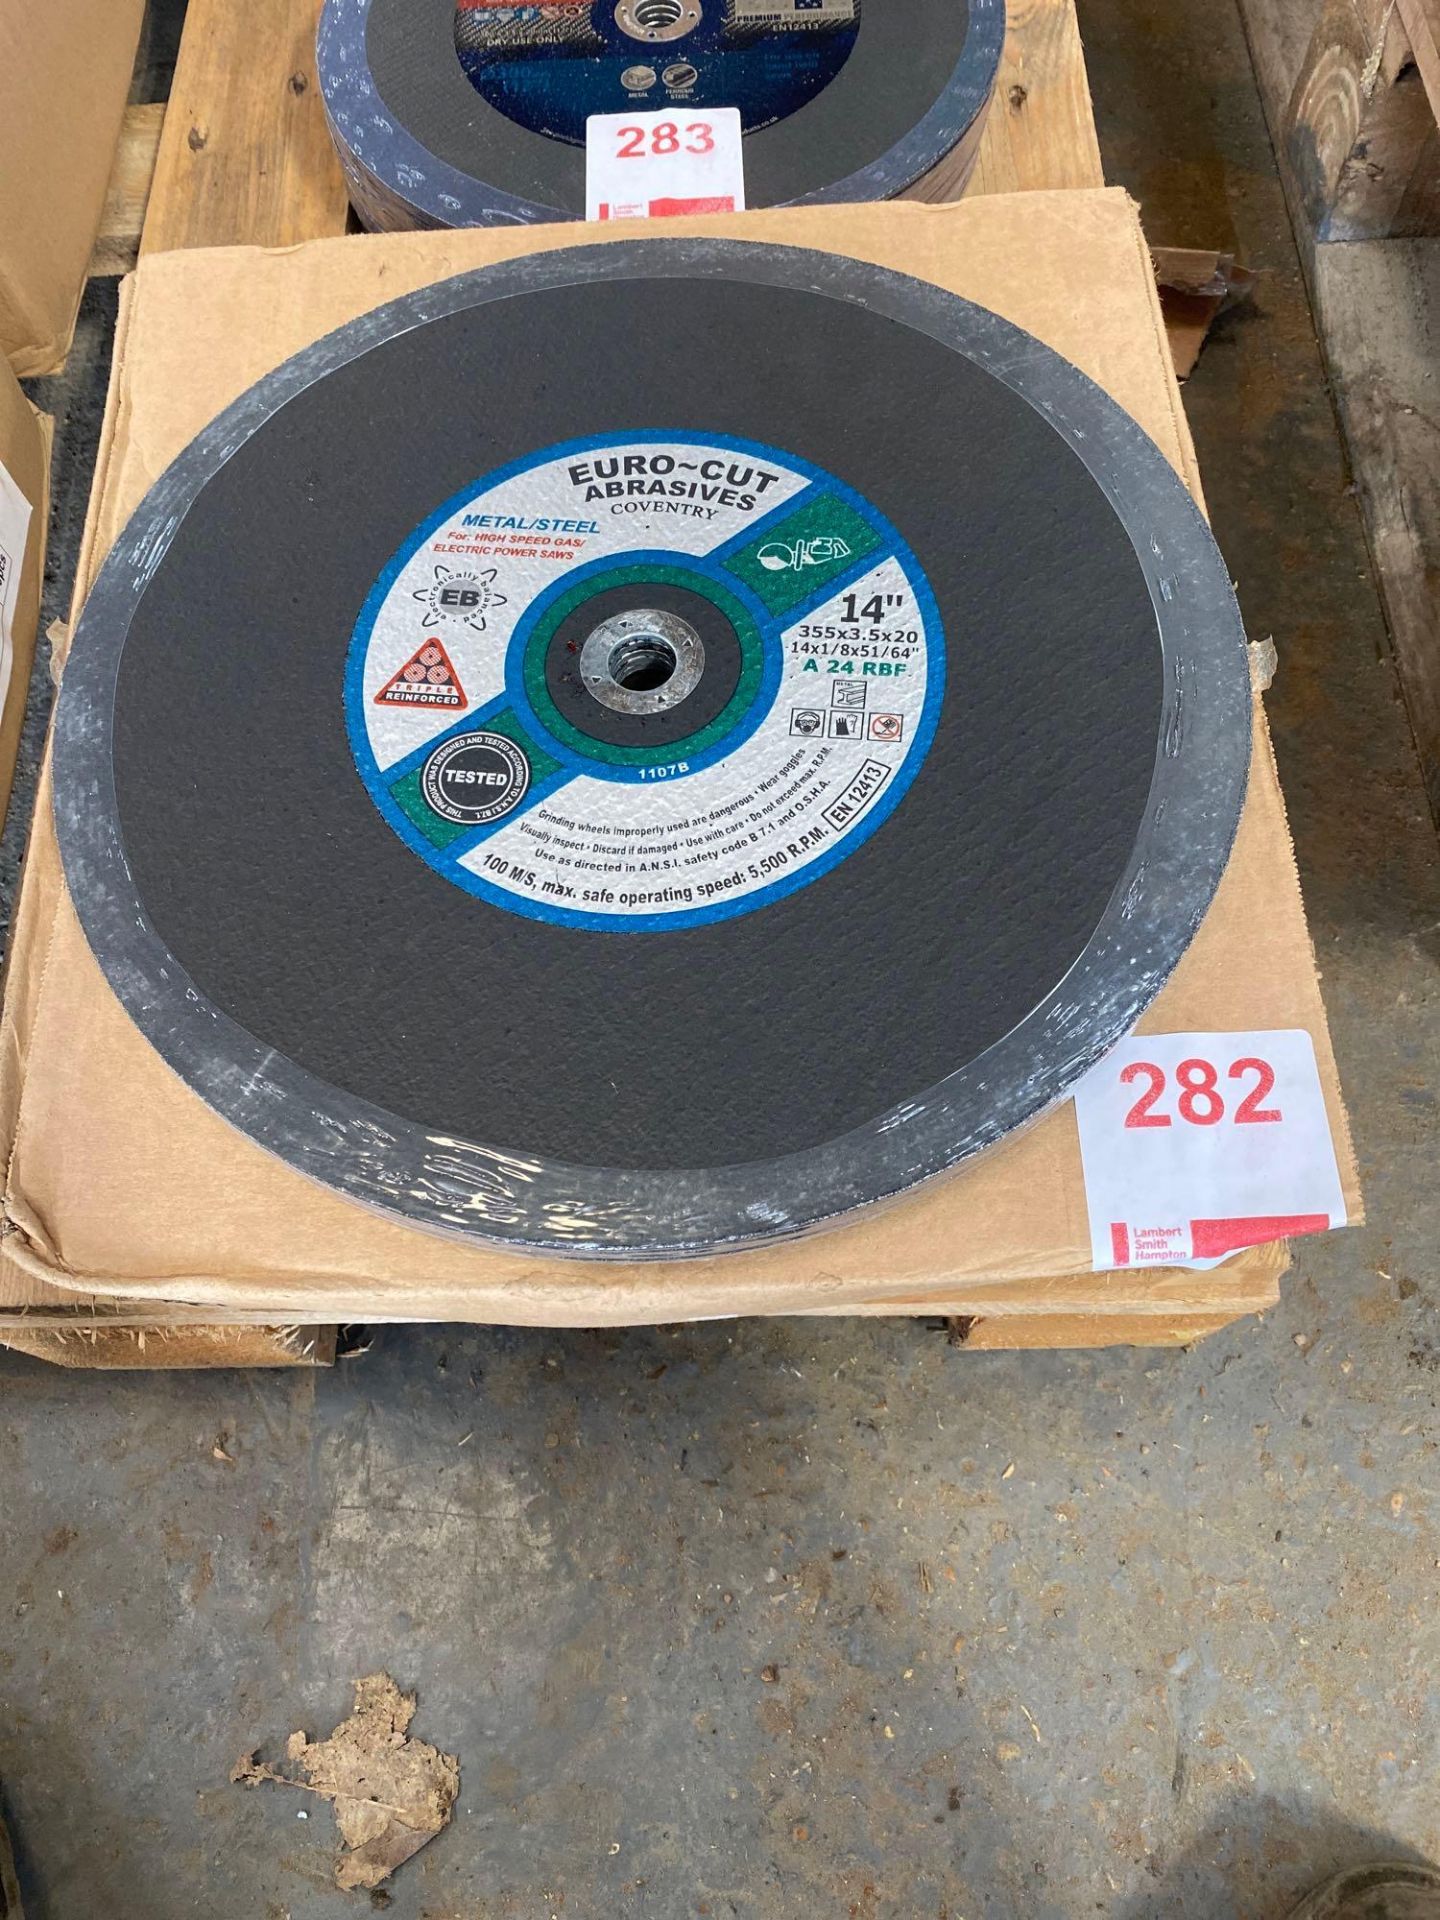 25 euro-cut 14 inch abrasive disc for metal and steel